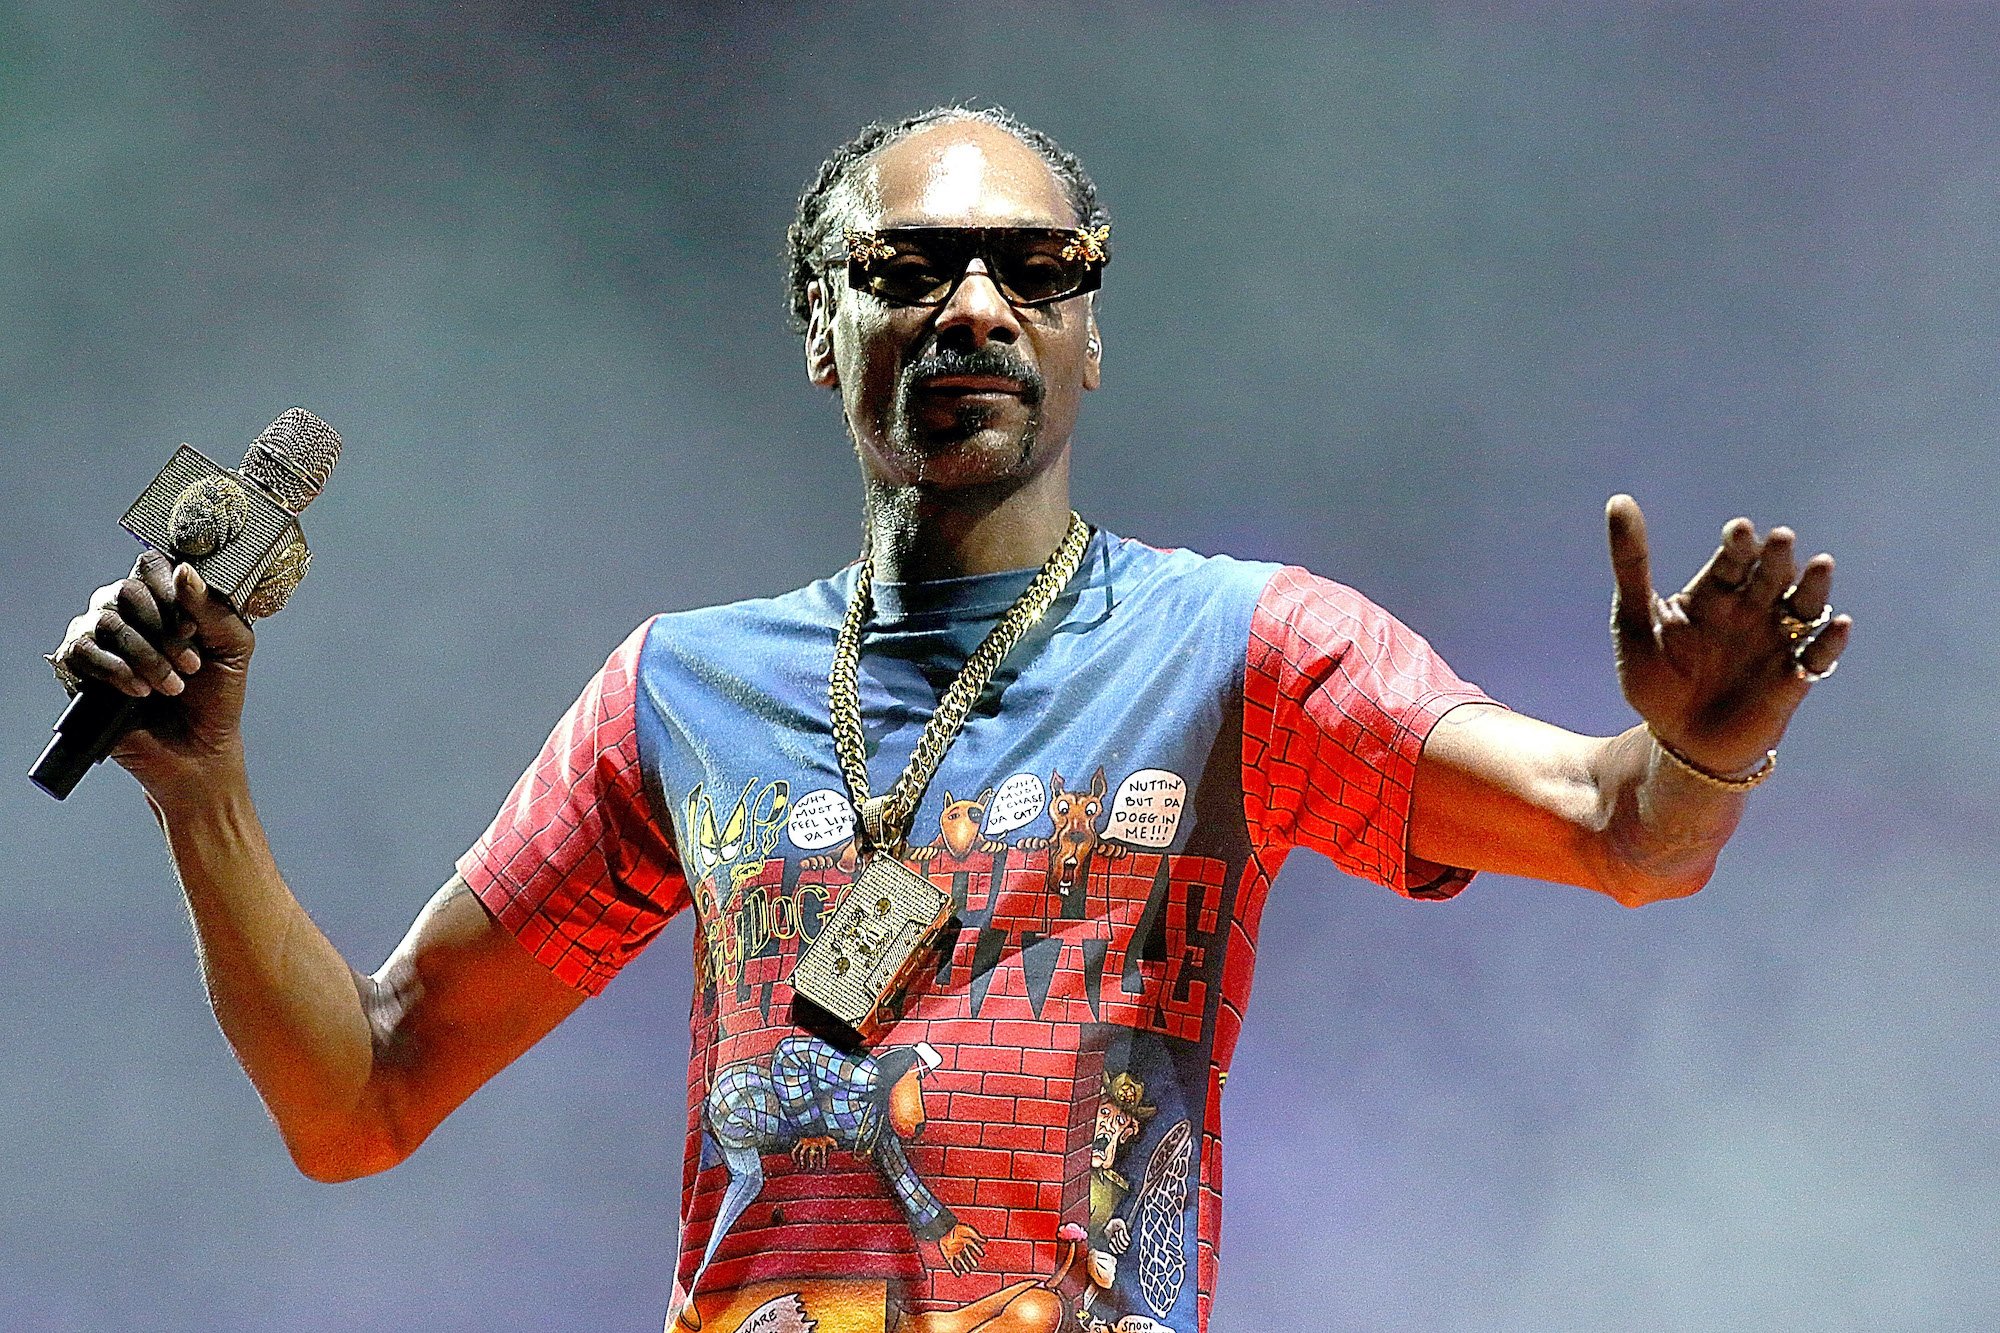 Snoop Dogg performs in concert